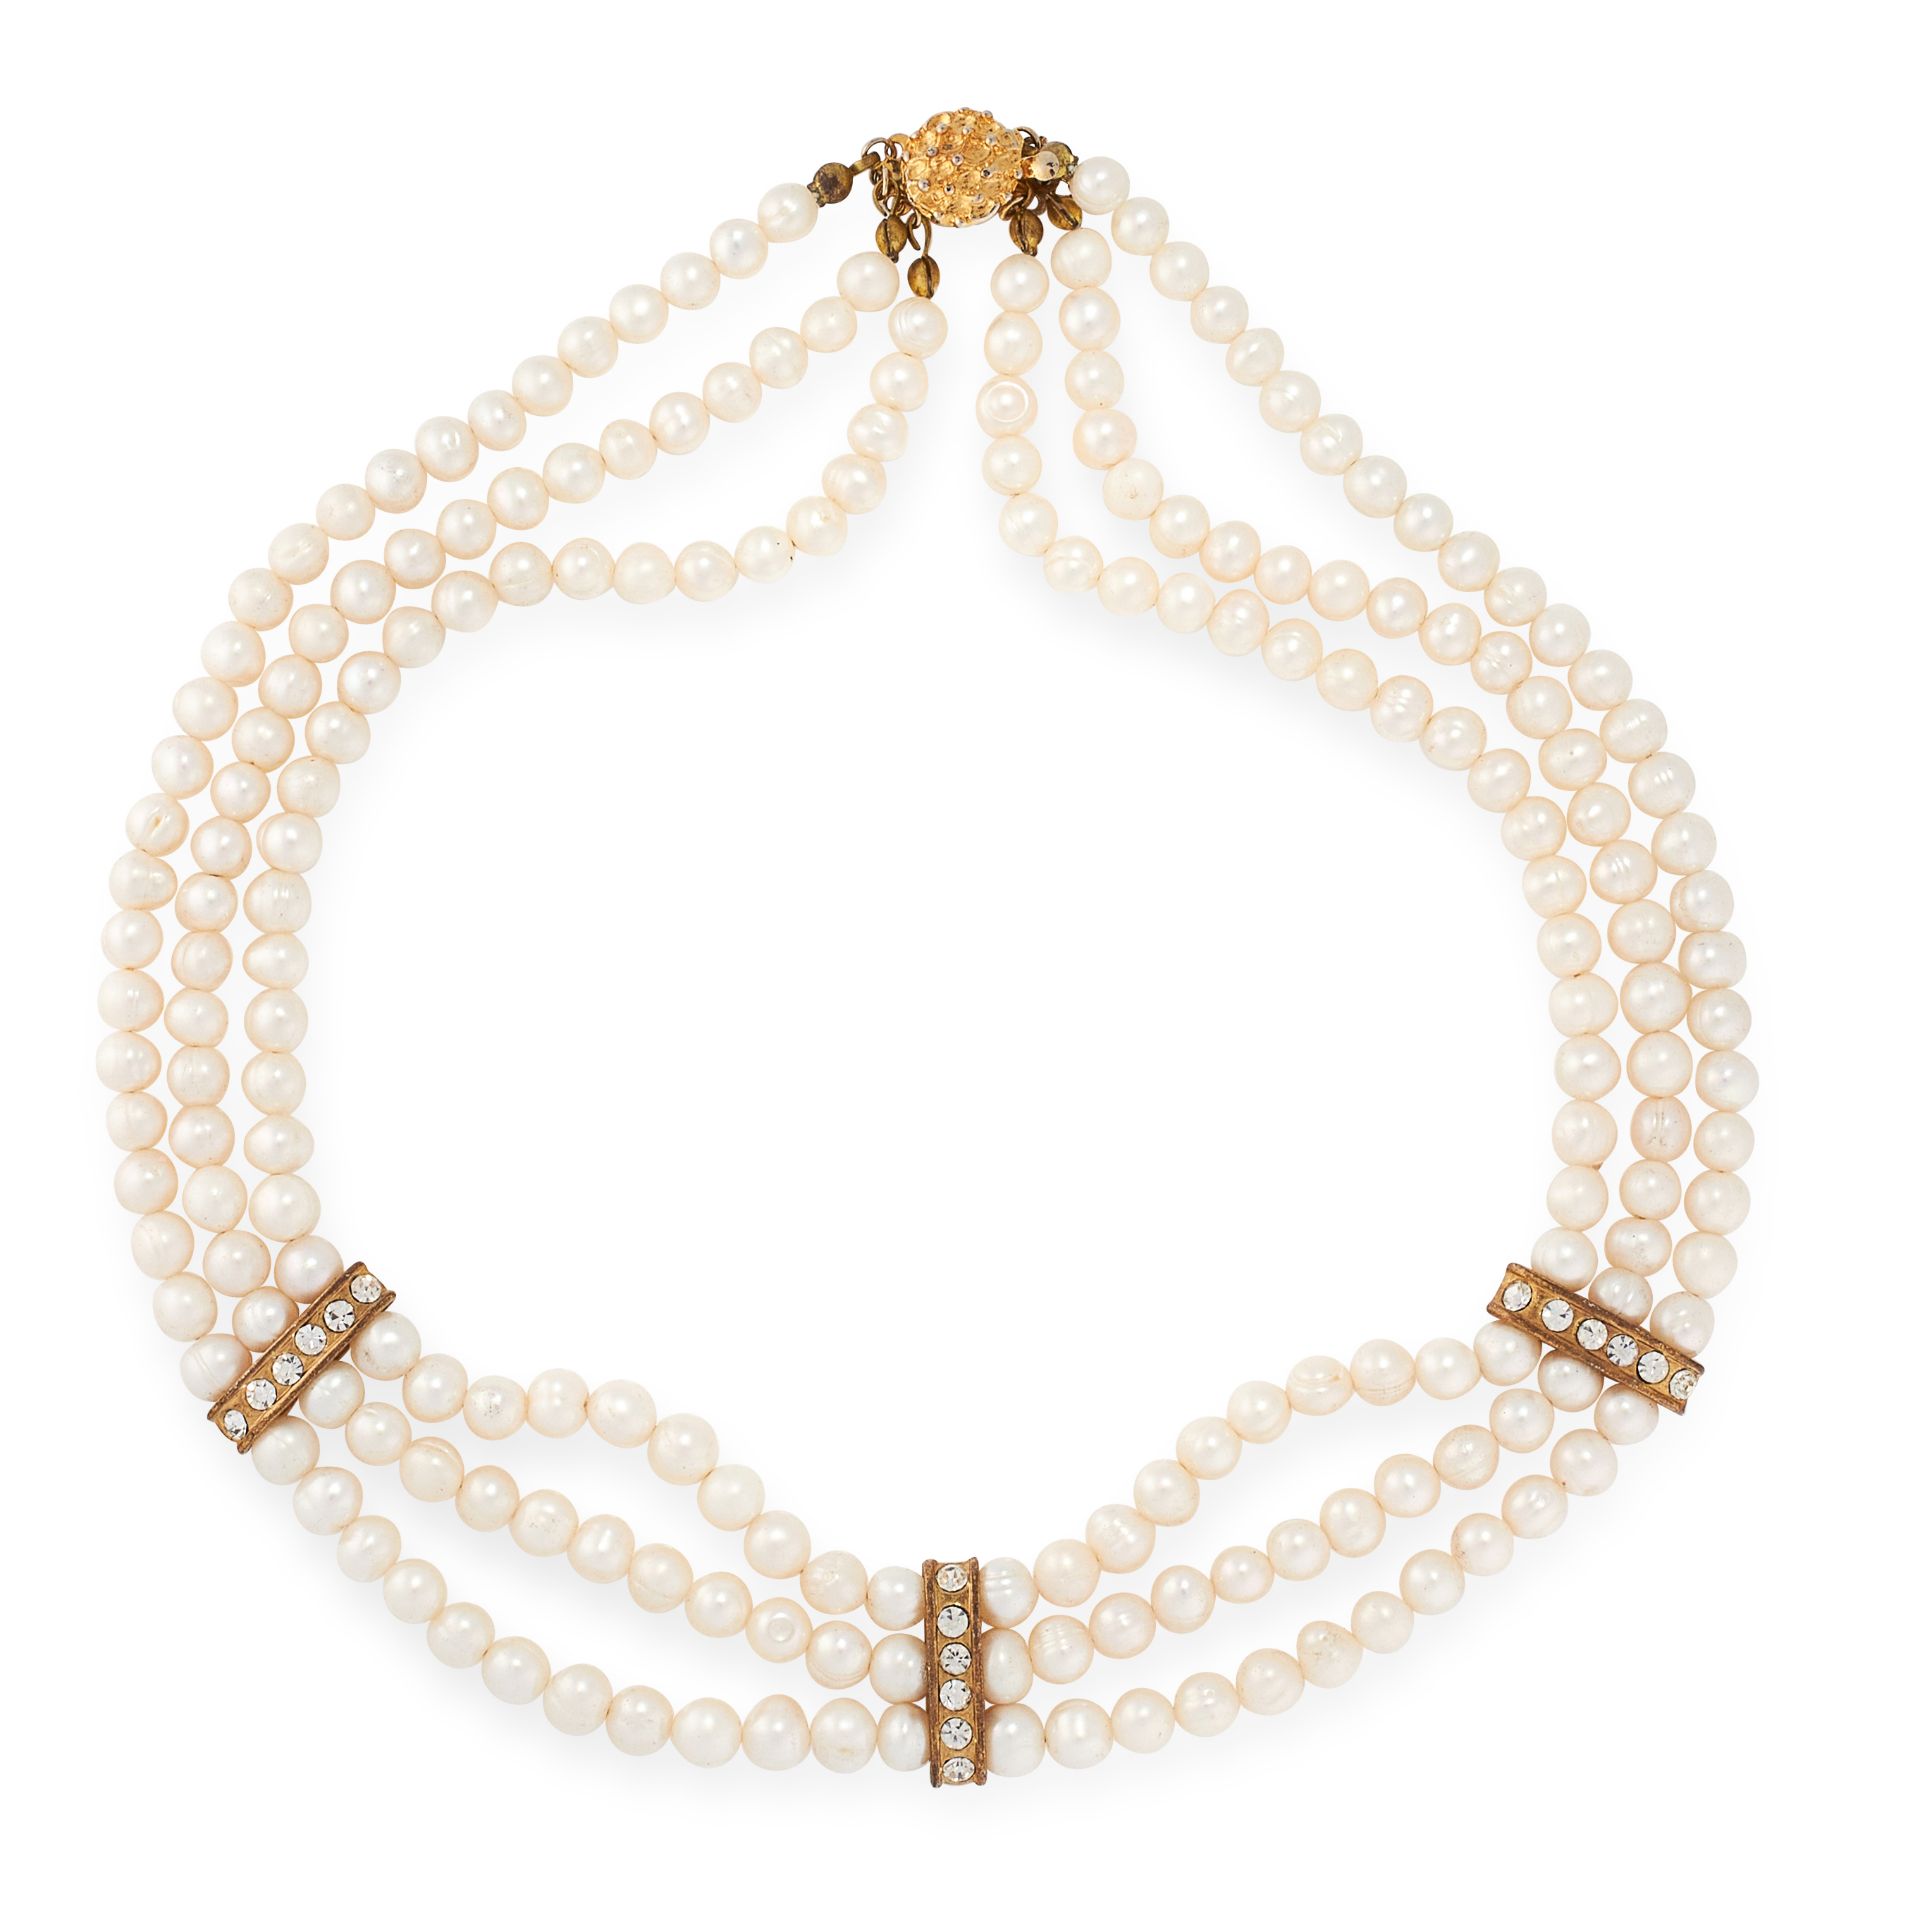 A PEARL CHOKER NECKLACE comprising of three rows of pearl beads ranging from 6.1mm-6.6mm, with paste